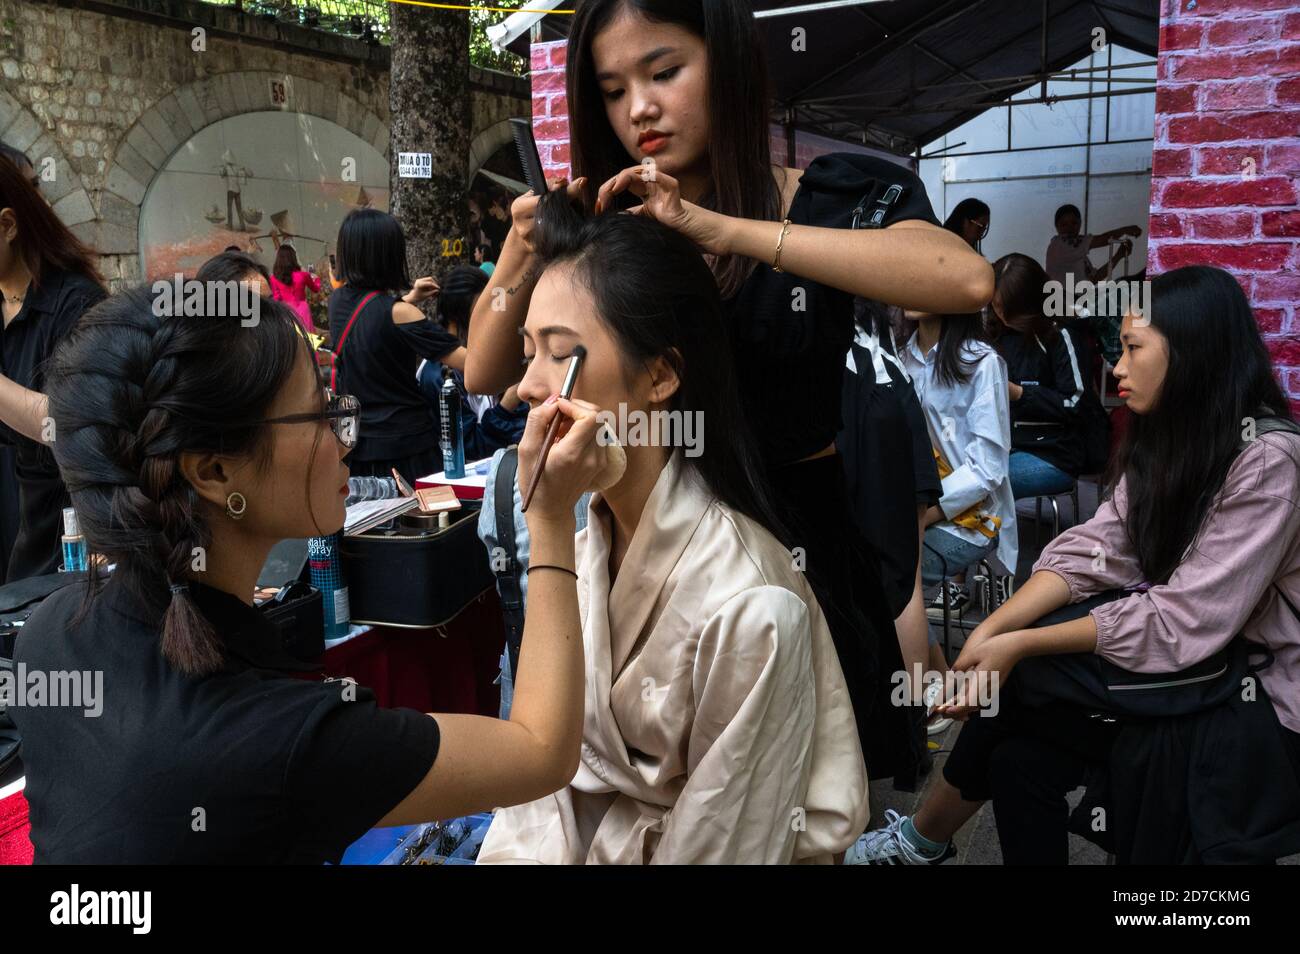 Young women getting made up for a modeling event, Pho Bich Hoa Phung Hung, Hanoi, Vietnam Stock Photo